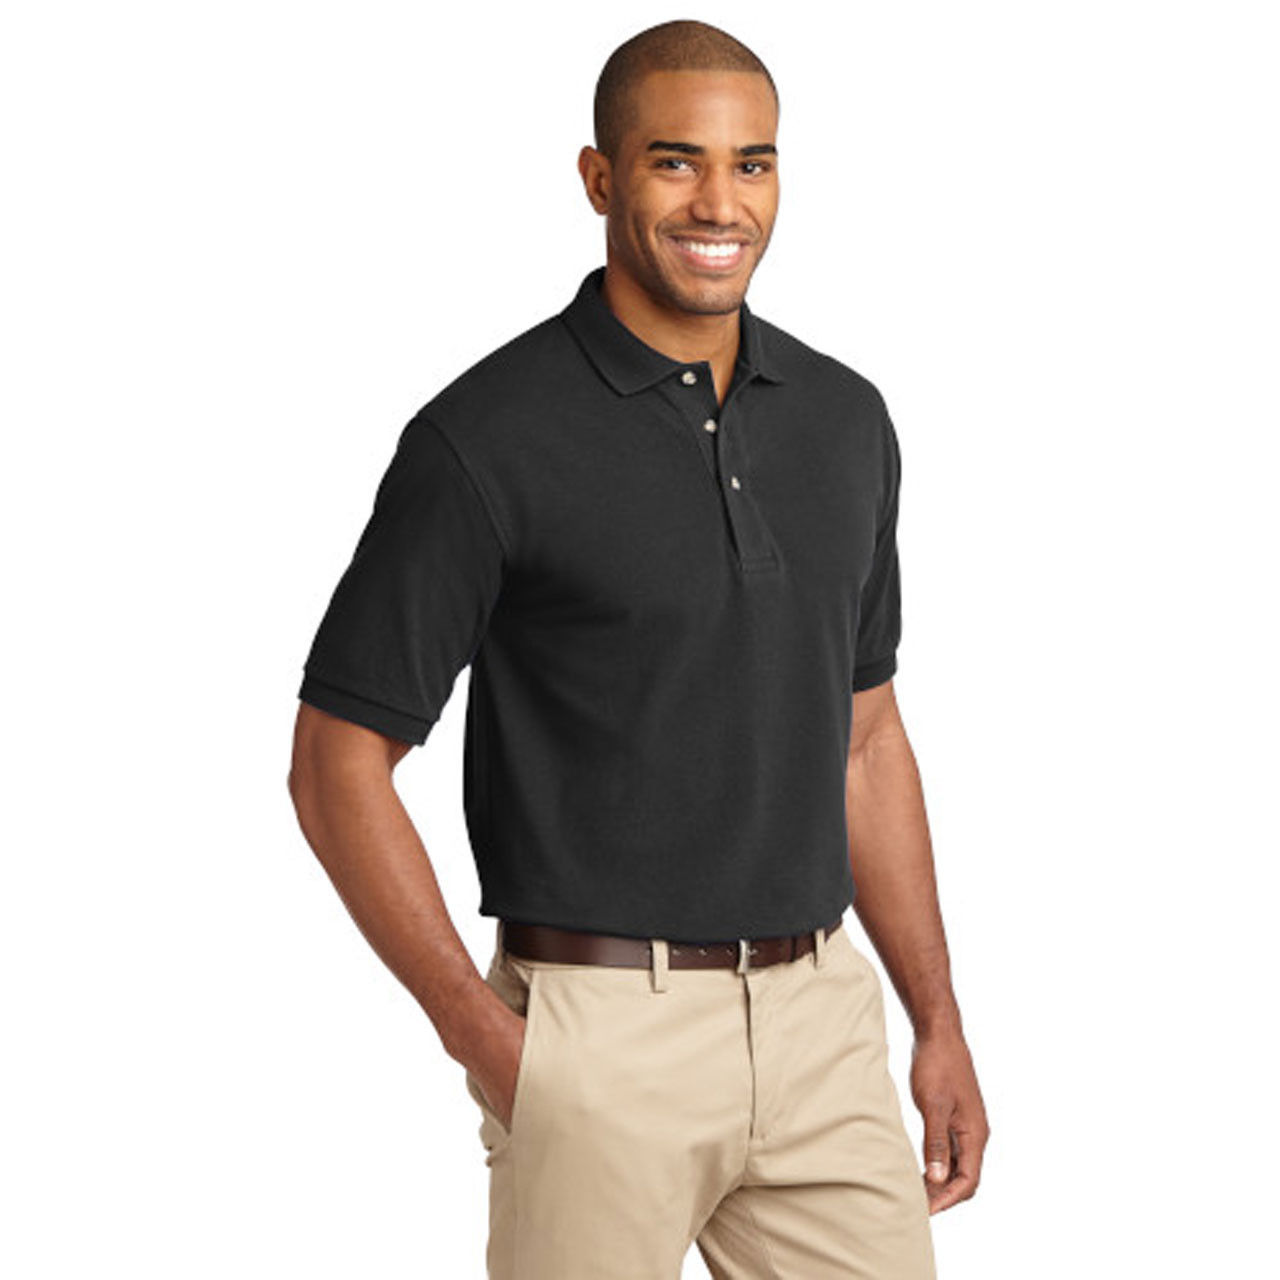 What fabric is used in the 100 cotton polo shirts wholesale, specifically the K420 Black Pique?